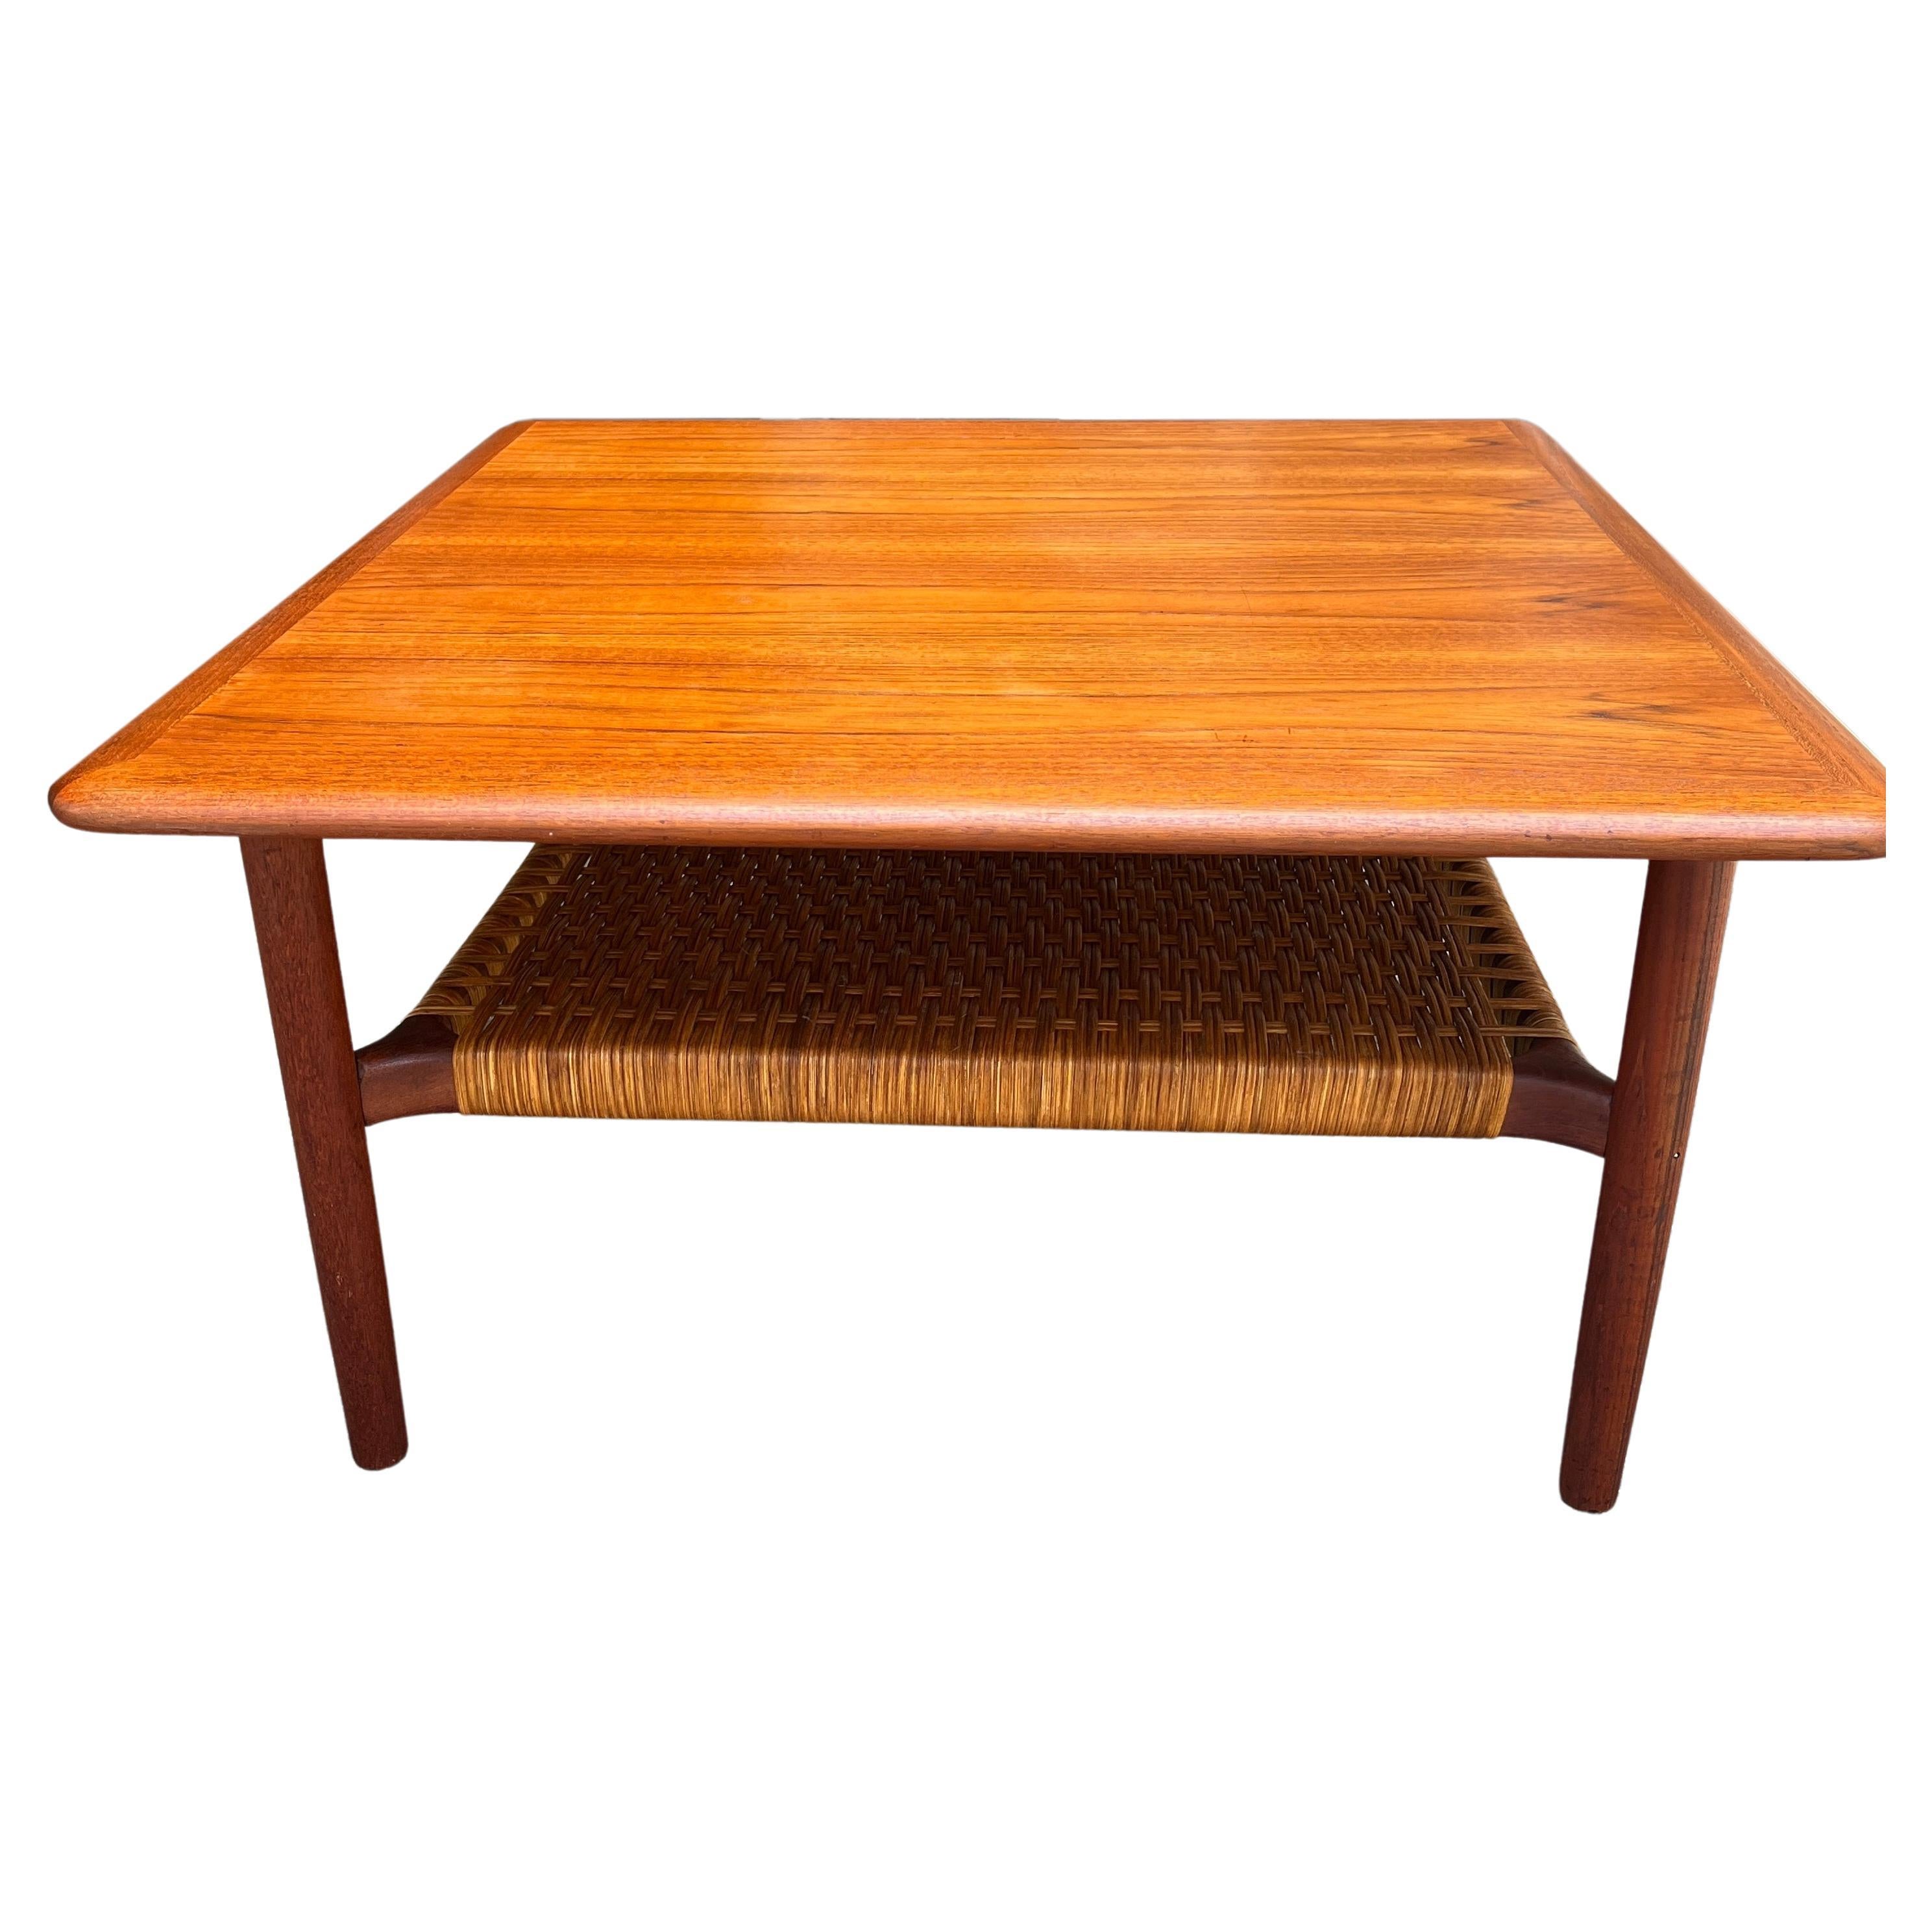 Danish Beautiful Midcentury Teak and Cane Coffee Table For Sale